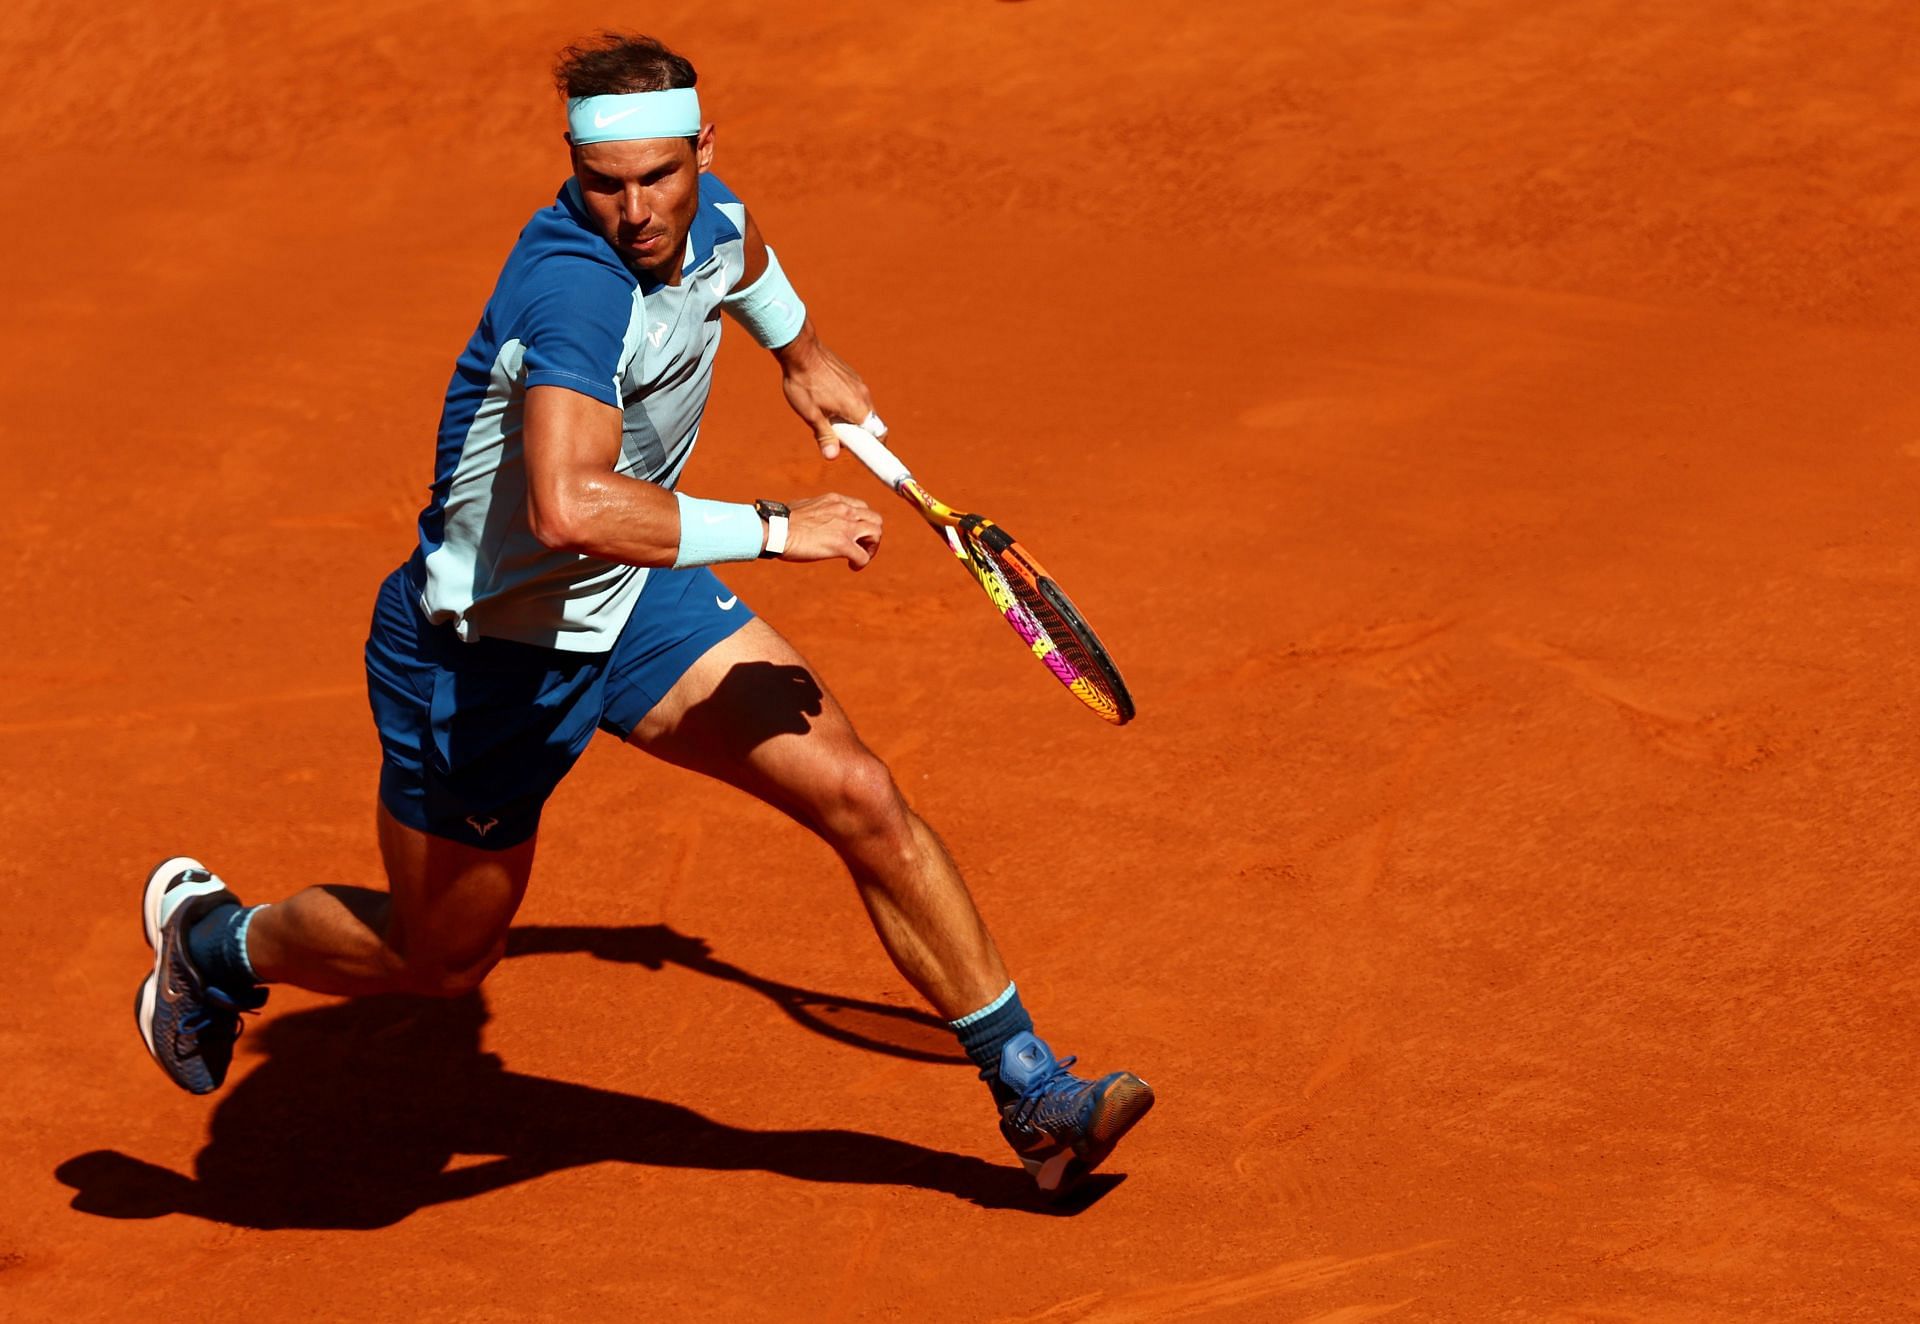 Rafael Nadal had to toil for his victory over David Goffin at the Madrid Open.